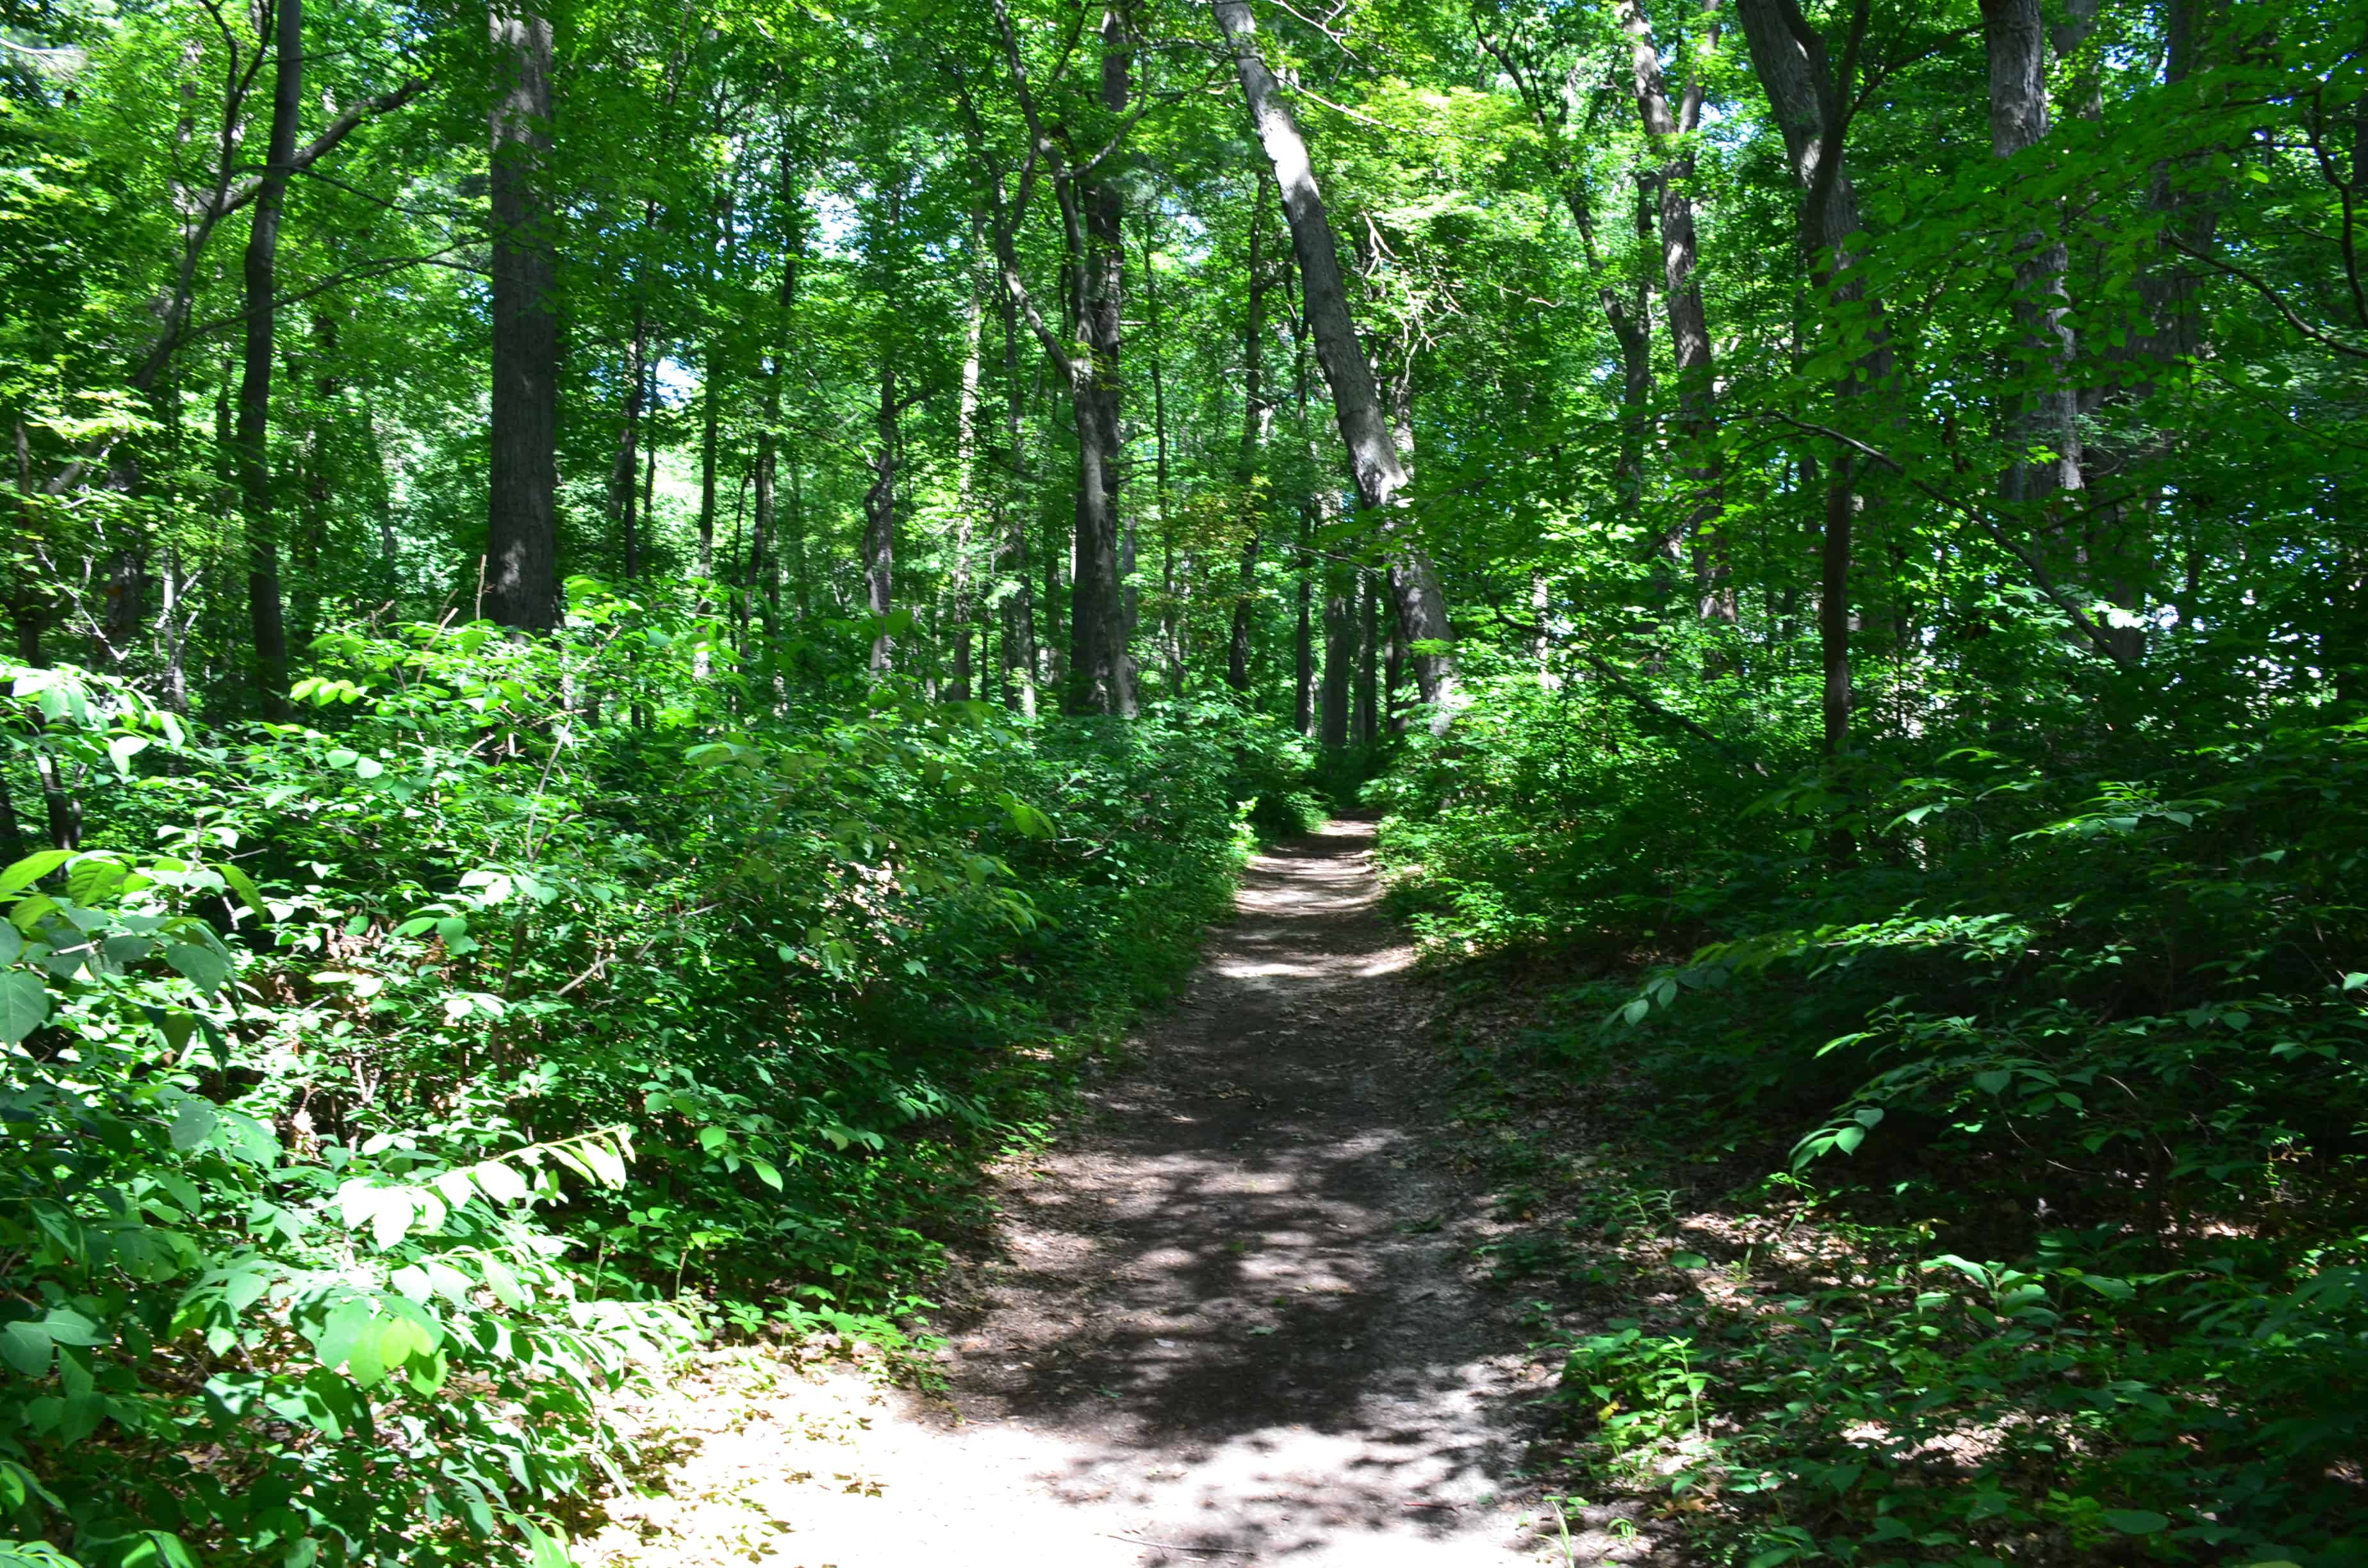 The Pinery on Trail #10 at Indiana Dunes State Park